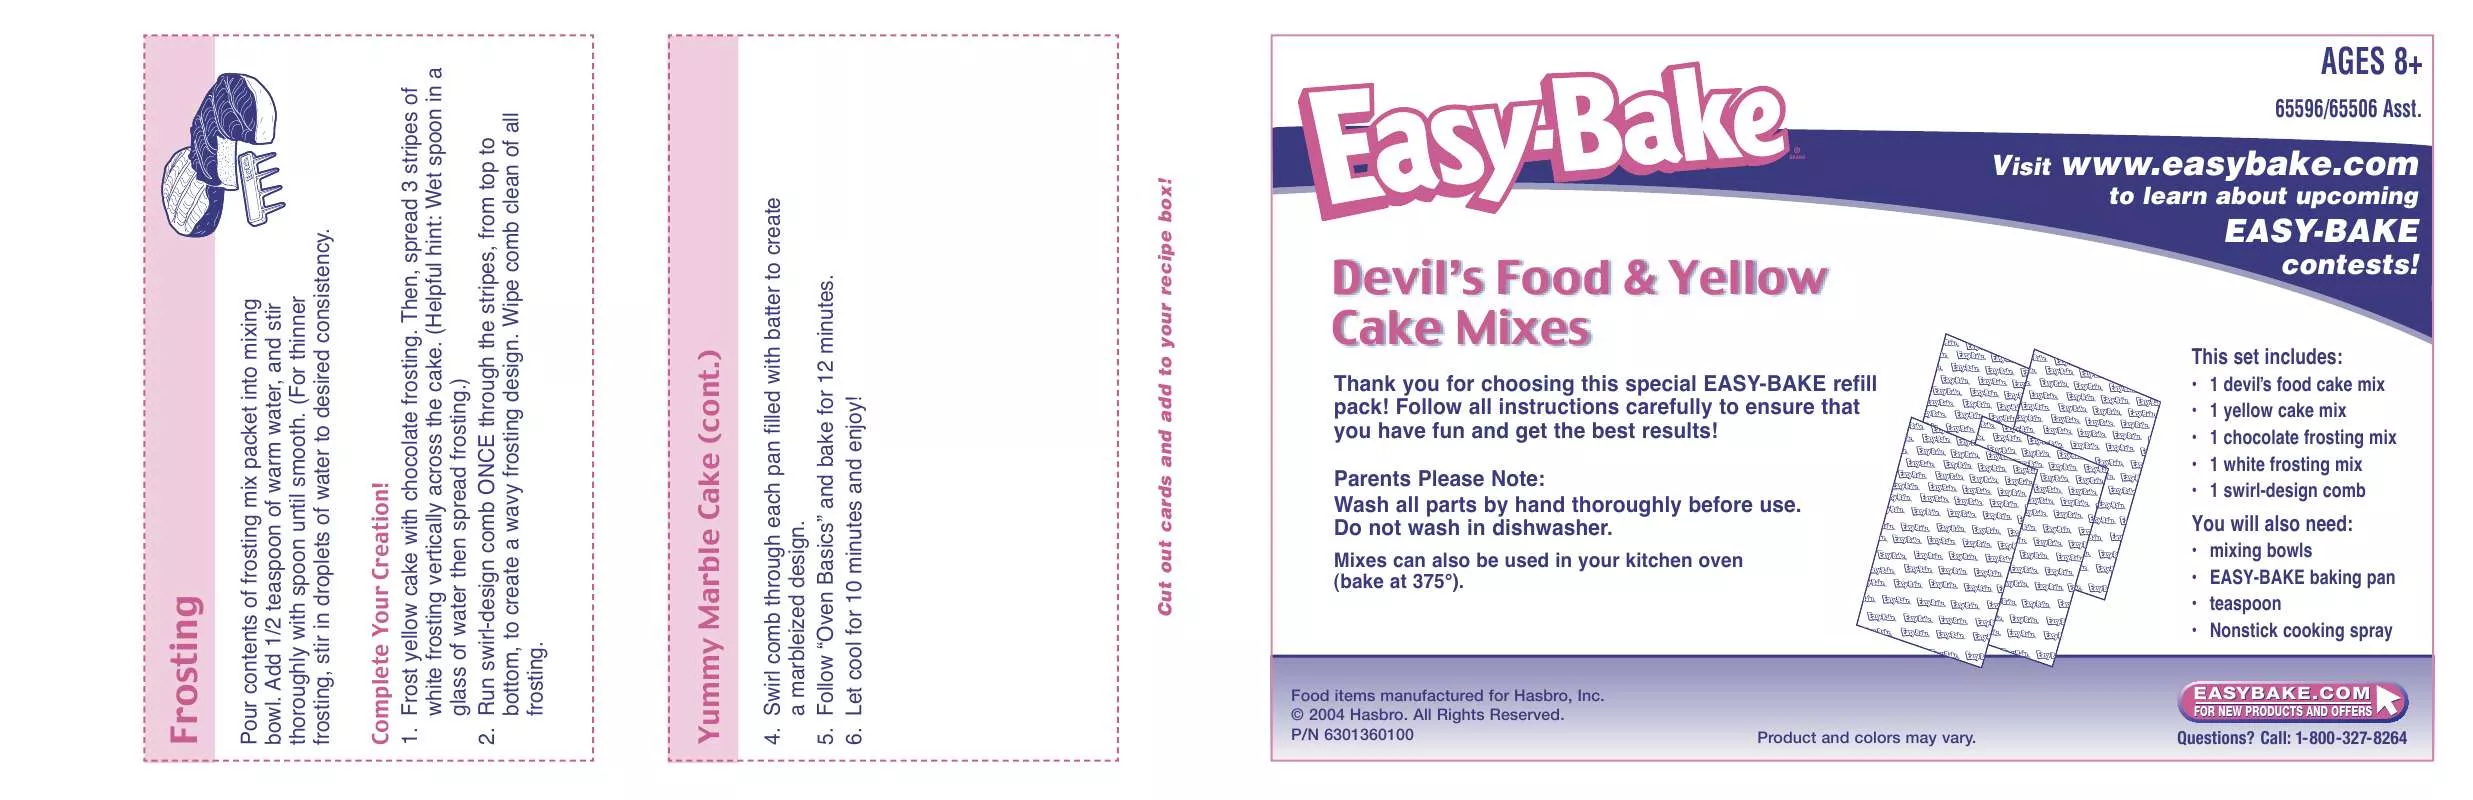 Mode d'emploi HASBRO EASY BAKE DEVILS FOOD AND YELLOW CAKE MIXES 2004